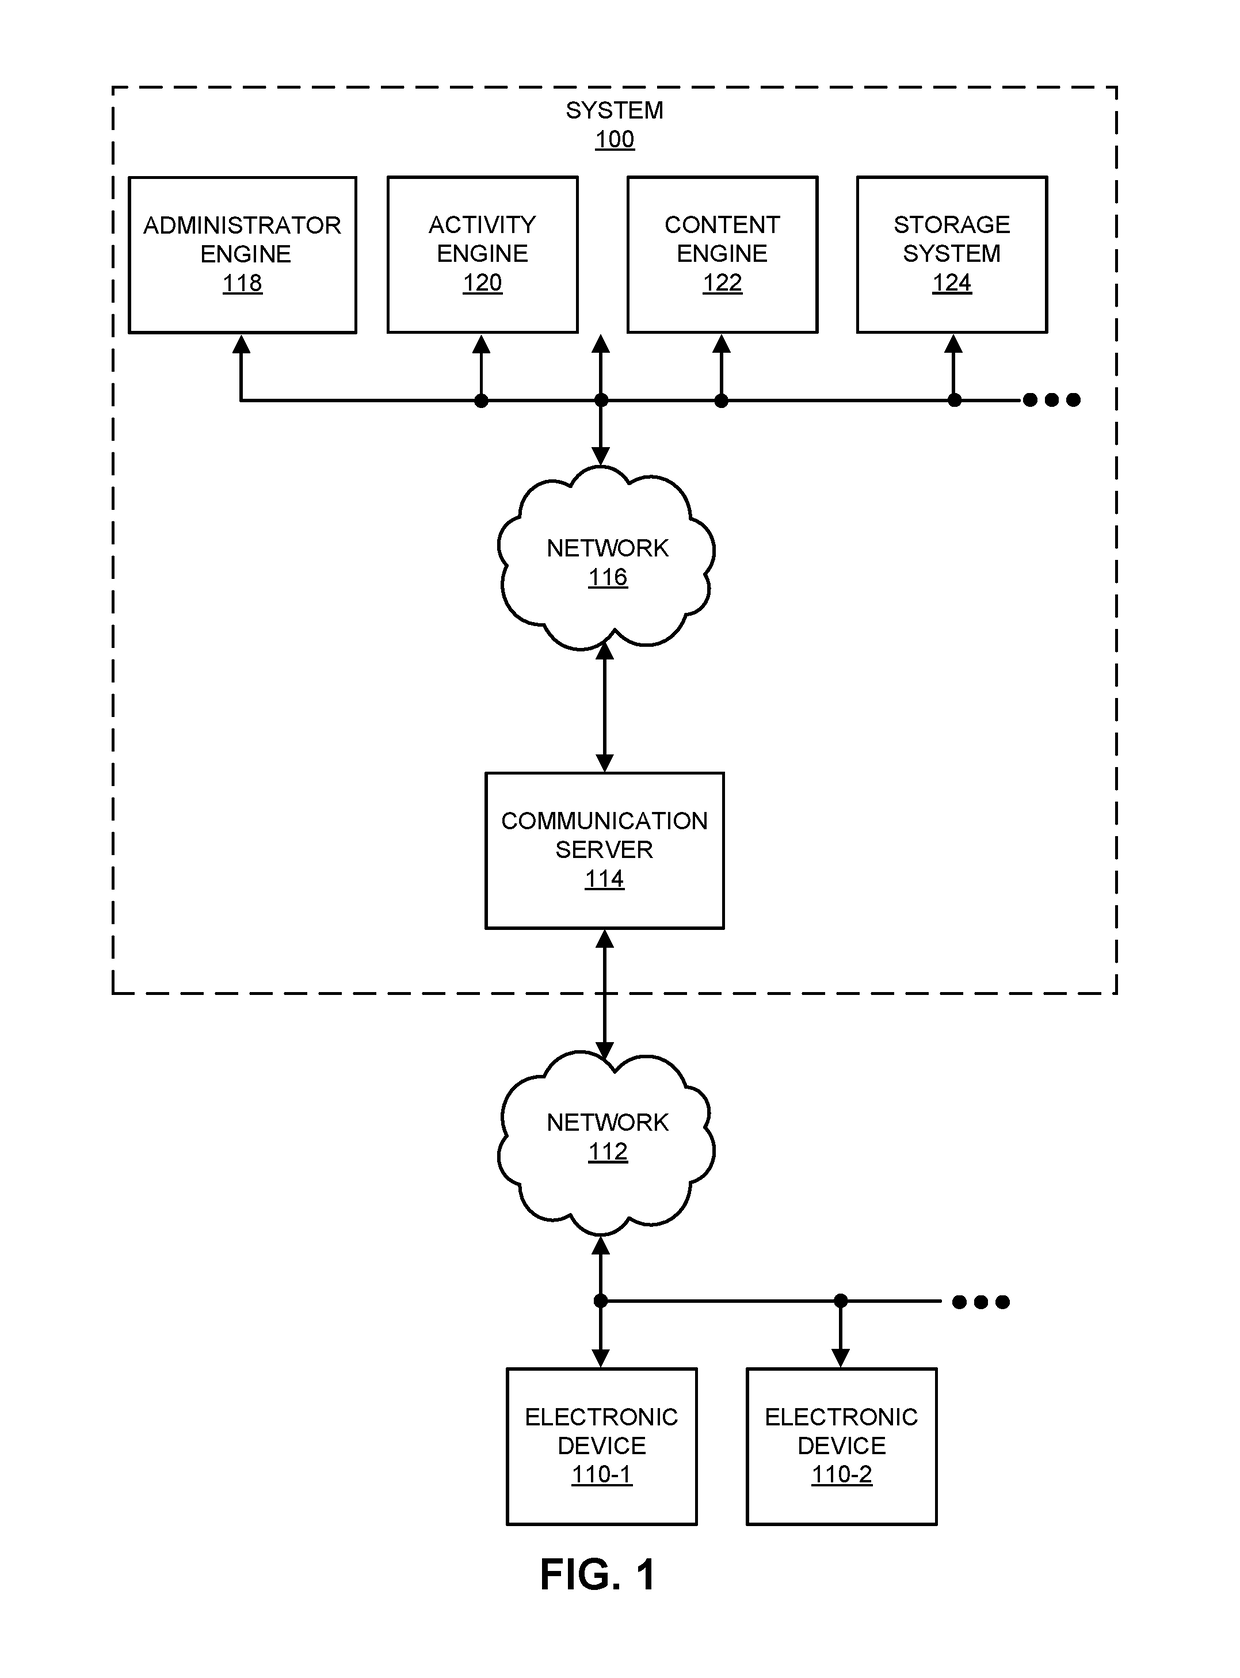 Throughput-based fan-out control in scalable distributed data stores